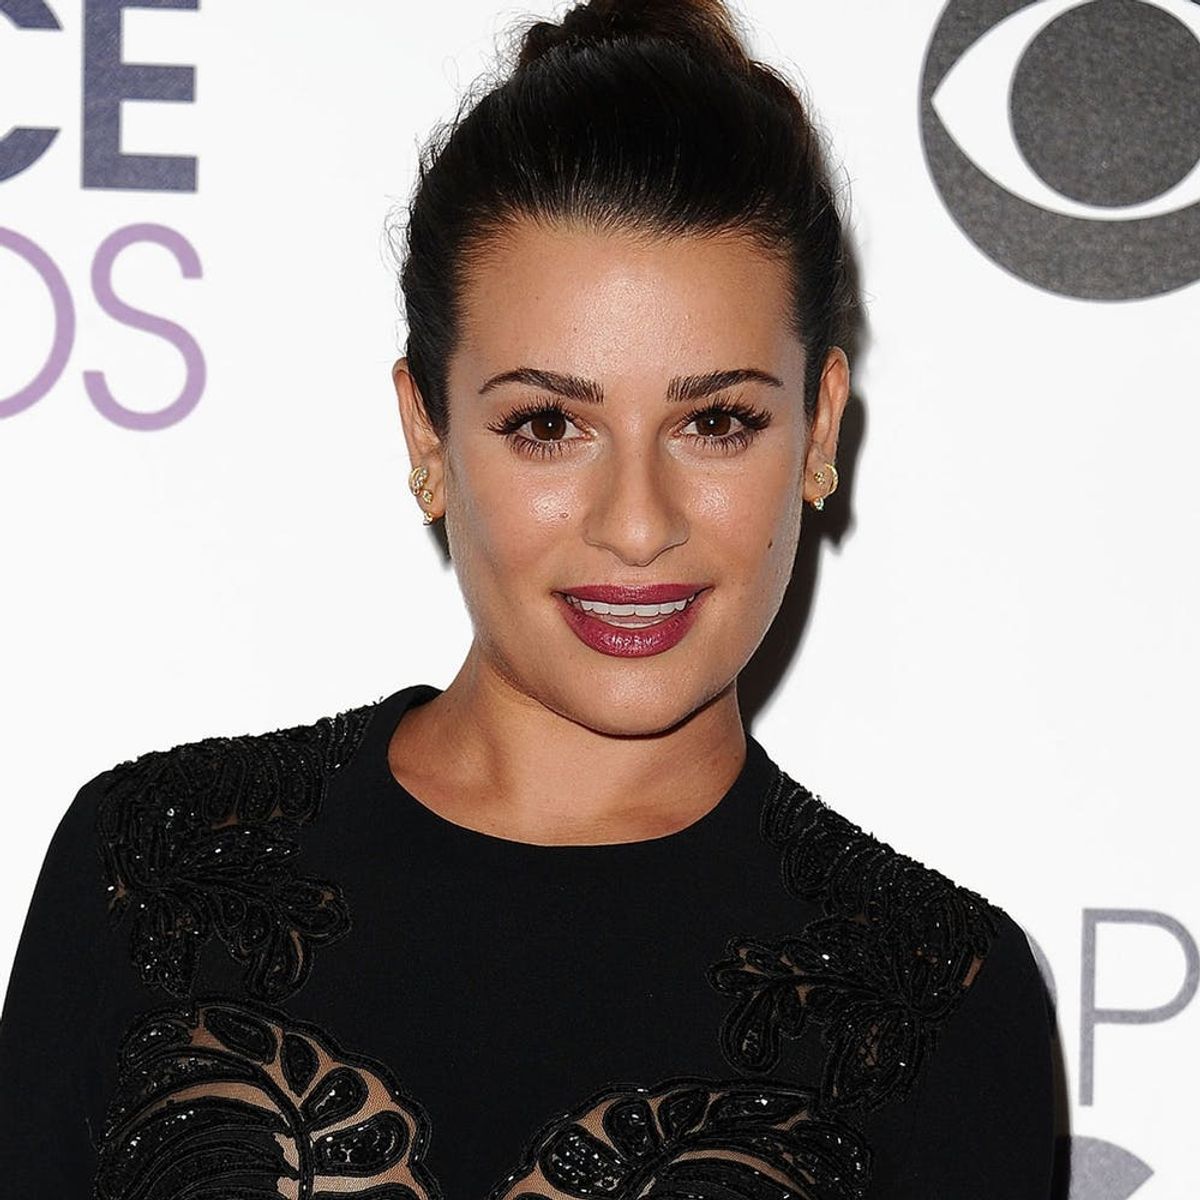 Lea Michele Wore This Surprising Drugstore Makeup on the Red Carpet Last Night